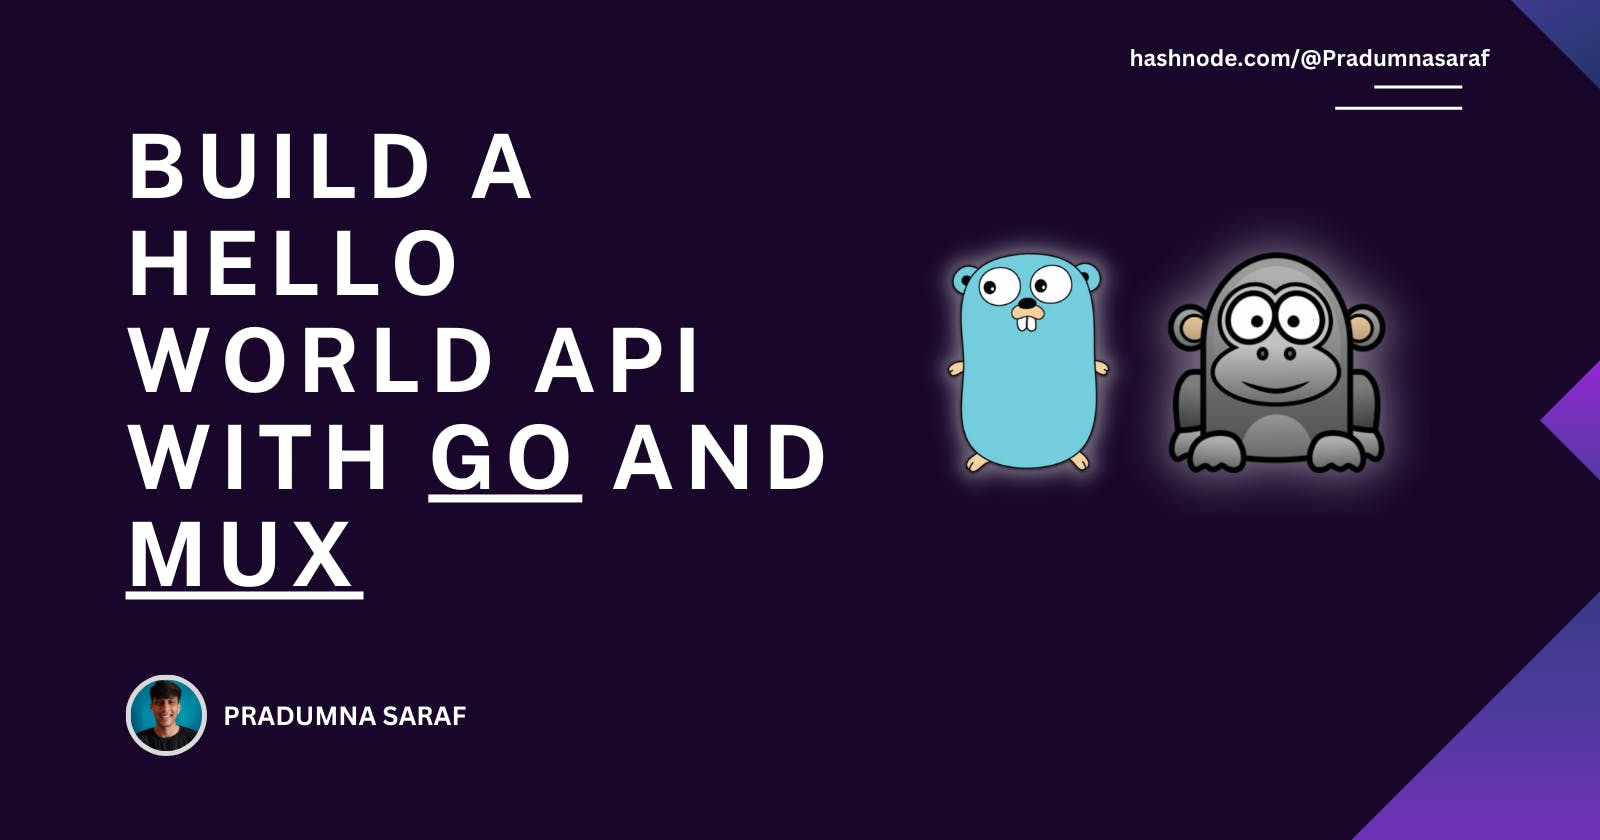 Build a Hello World API with Go and Mux